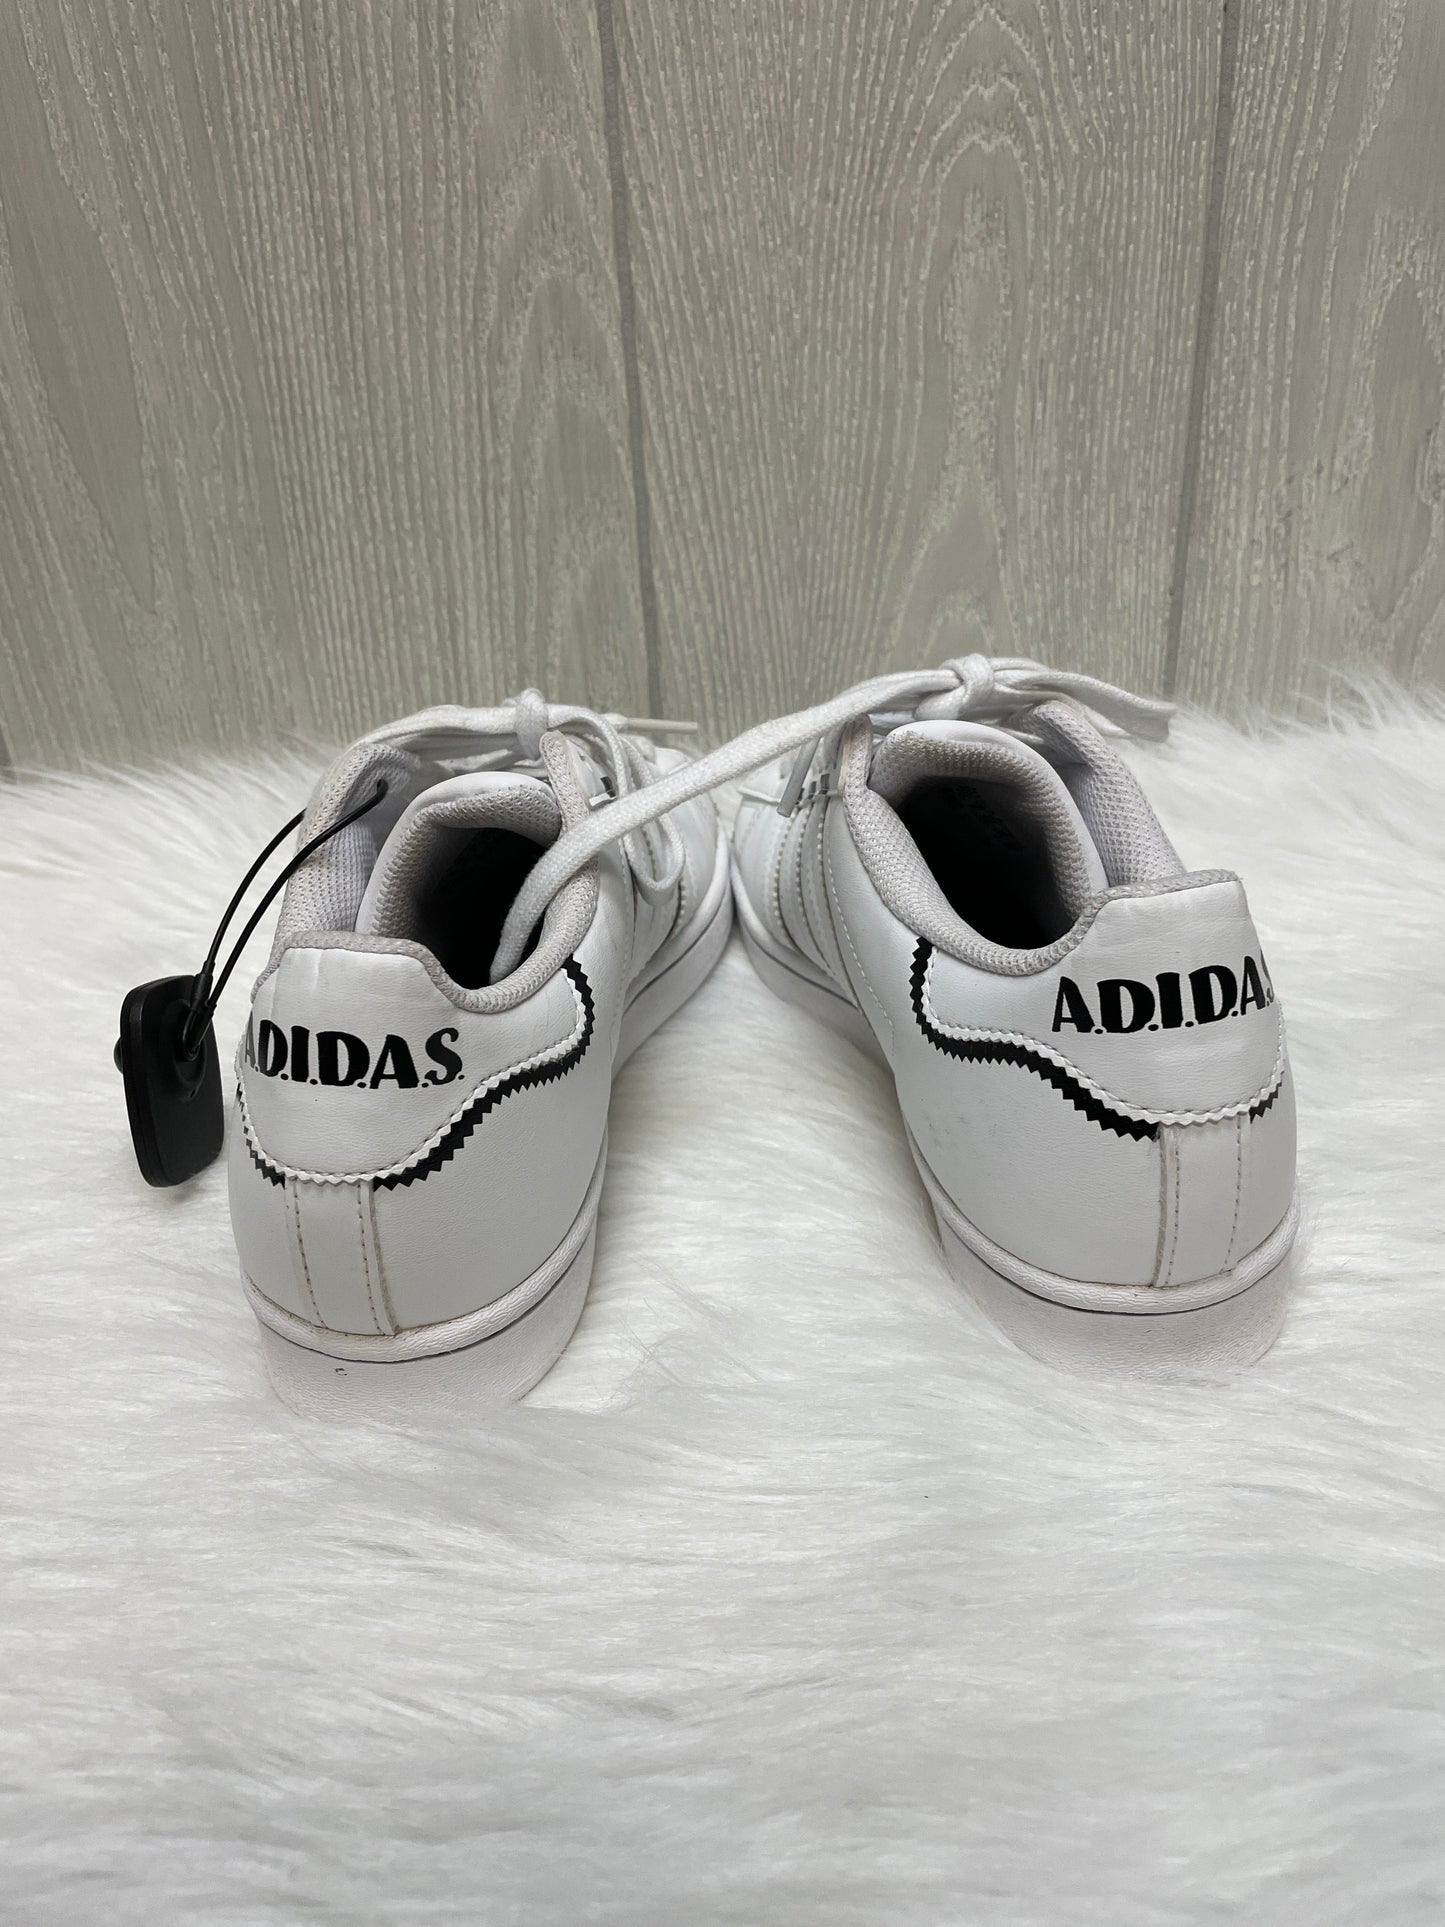 White Shoes Sneakers Adidas, Size 6.5